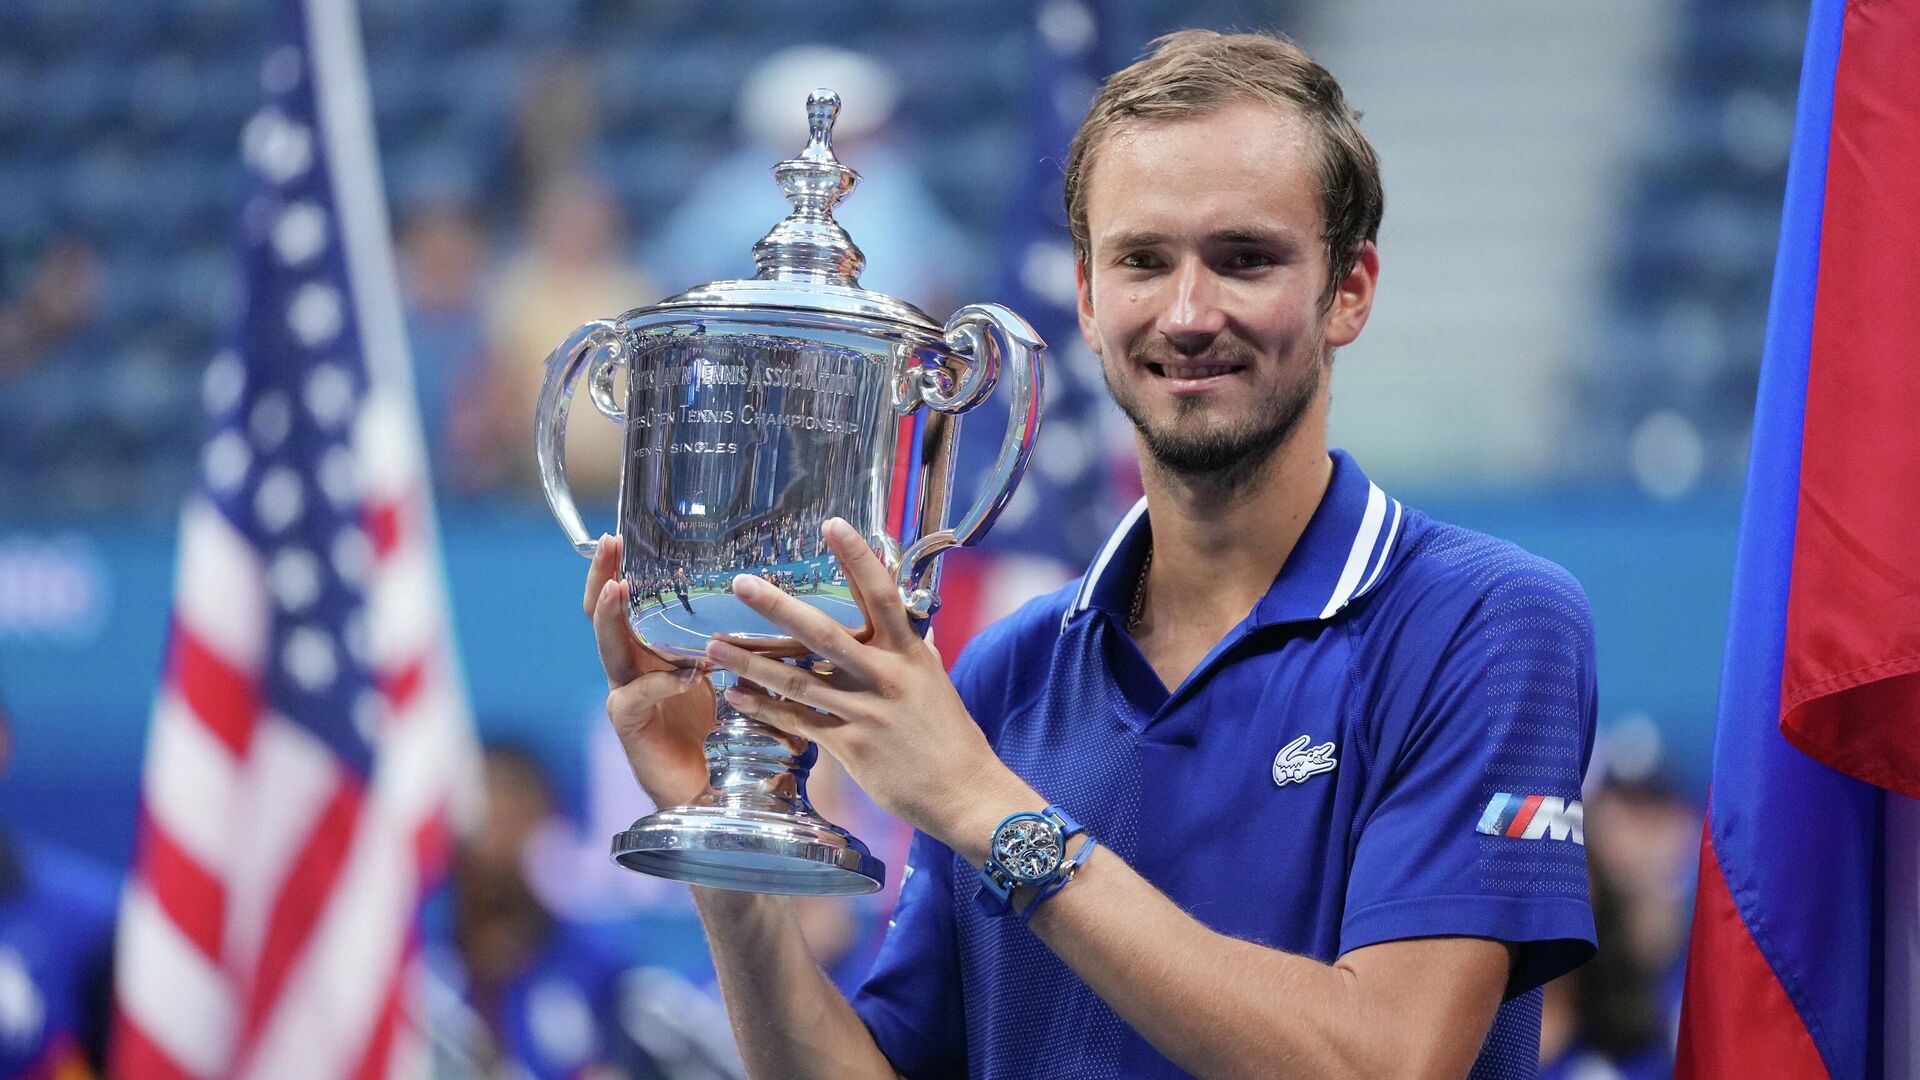 Sep 12, 2021; Flushing, NY, USA; Daniil Medvedev of Russia celebrates with the championship trophy after his match against Novak Djokovic of Serbia (not pictured) in the men's singles final on day fourteen of the 2021 U.S. Open tennis tournament at USTA Billie Jean King National Tennis Center. - Sputnik International, 1920, 12.09.2021